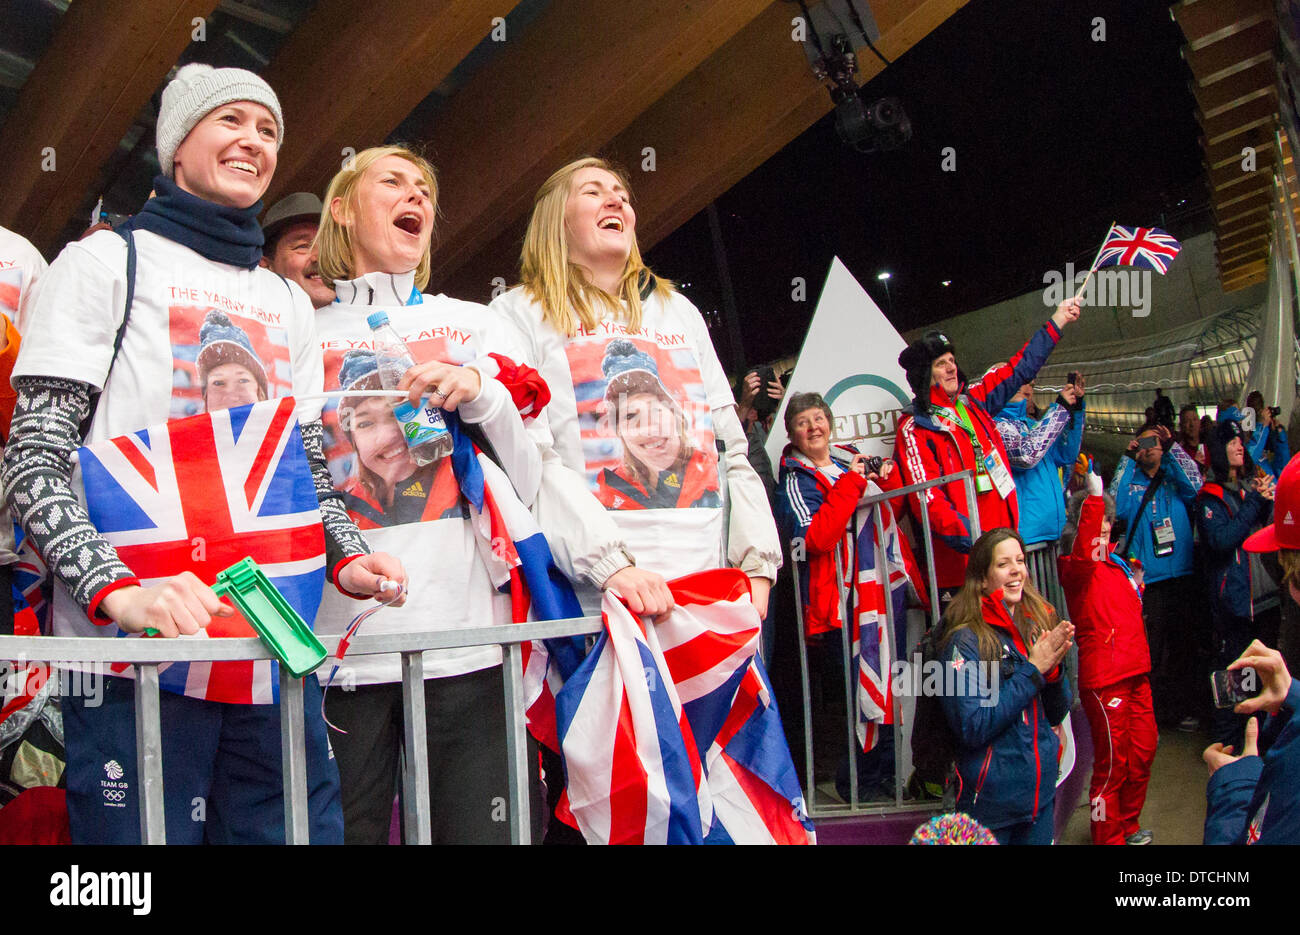 14.02.2014 The 'Yarny Army' - supporters of Lizzy Yarnold (GBR), Gold Medalist in the Ladies Skeleton Medal Round at the Olympic Winter Games XXII Sochi, Russia. Stock Photo